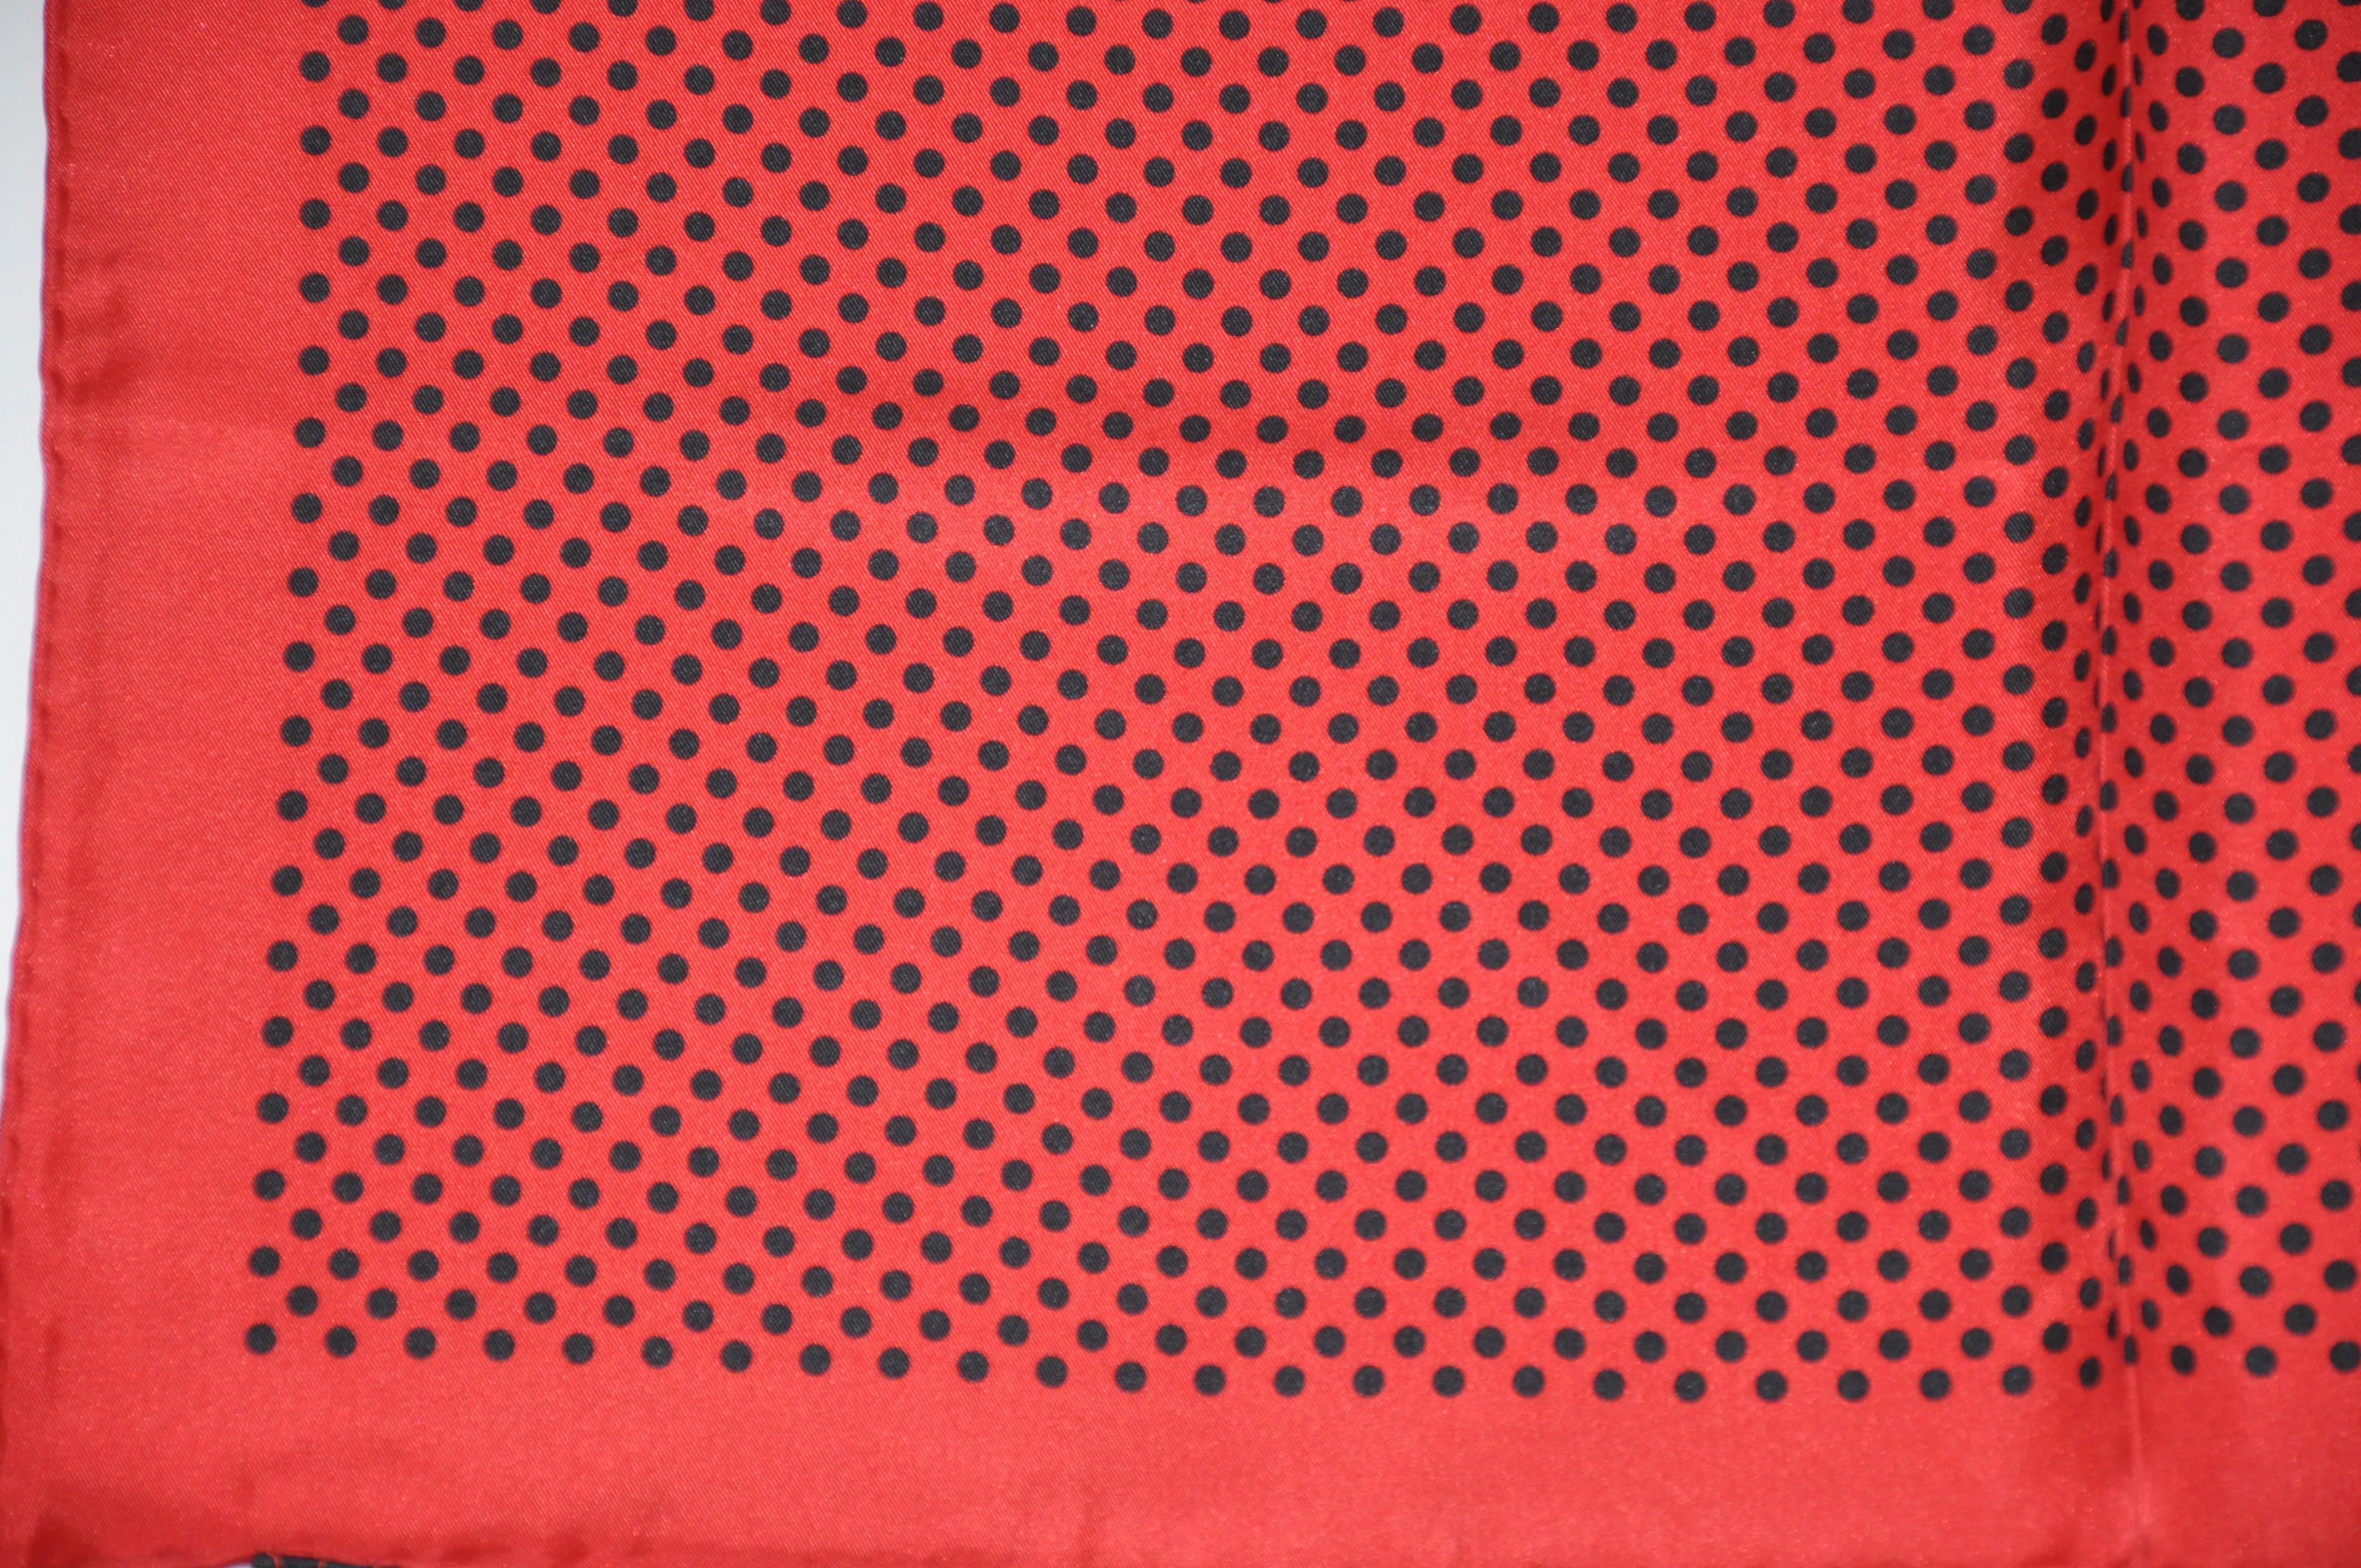 red and black handkerchief